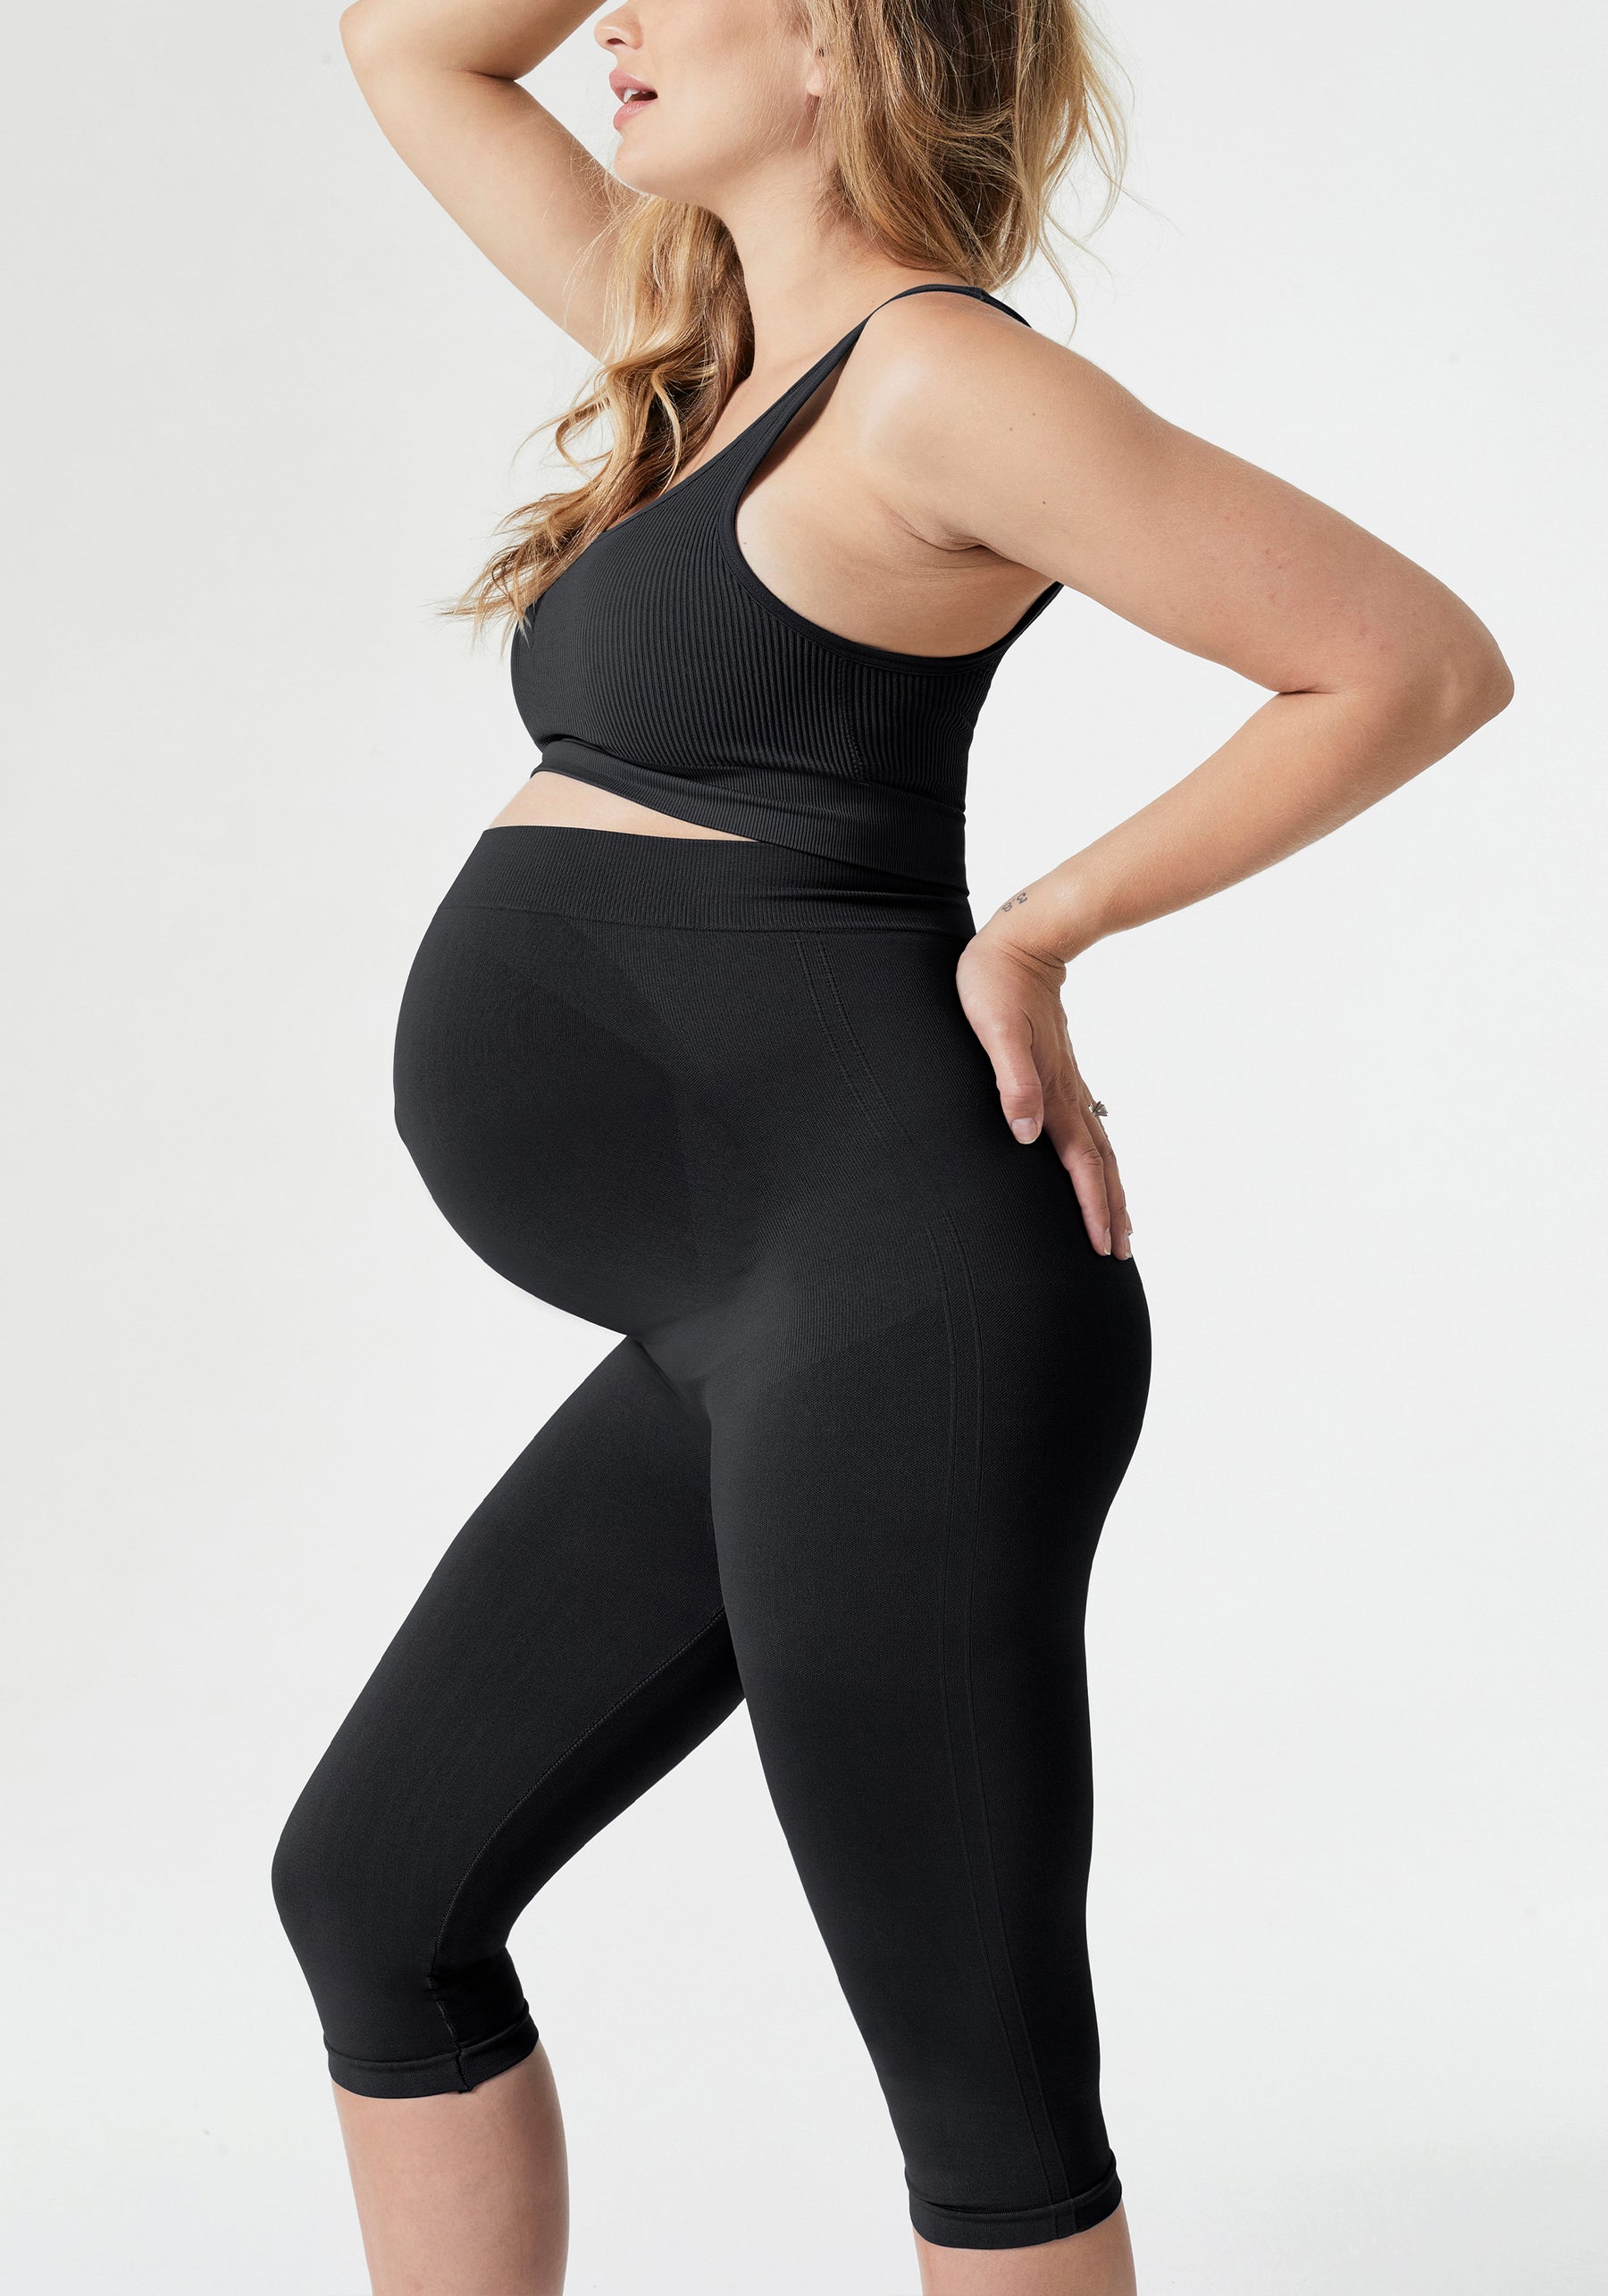 Active Maternity Leggings - High-Performance, Durable, & Midweight